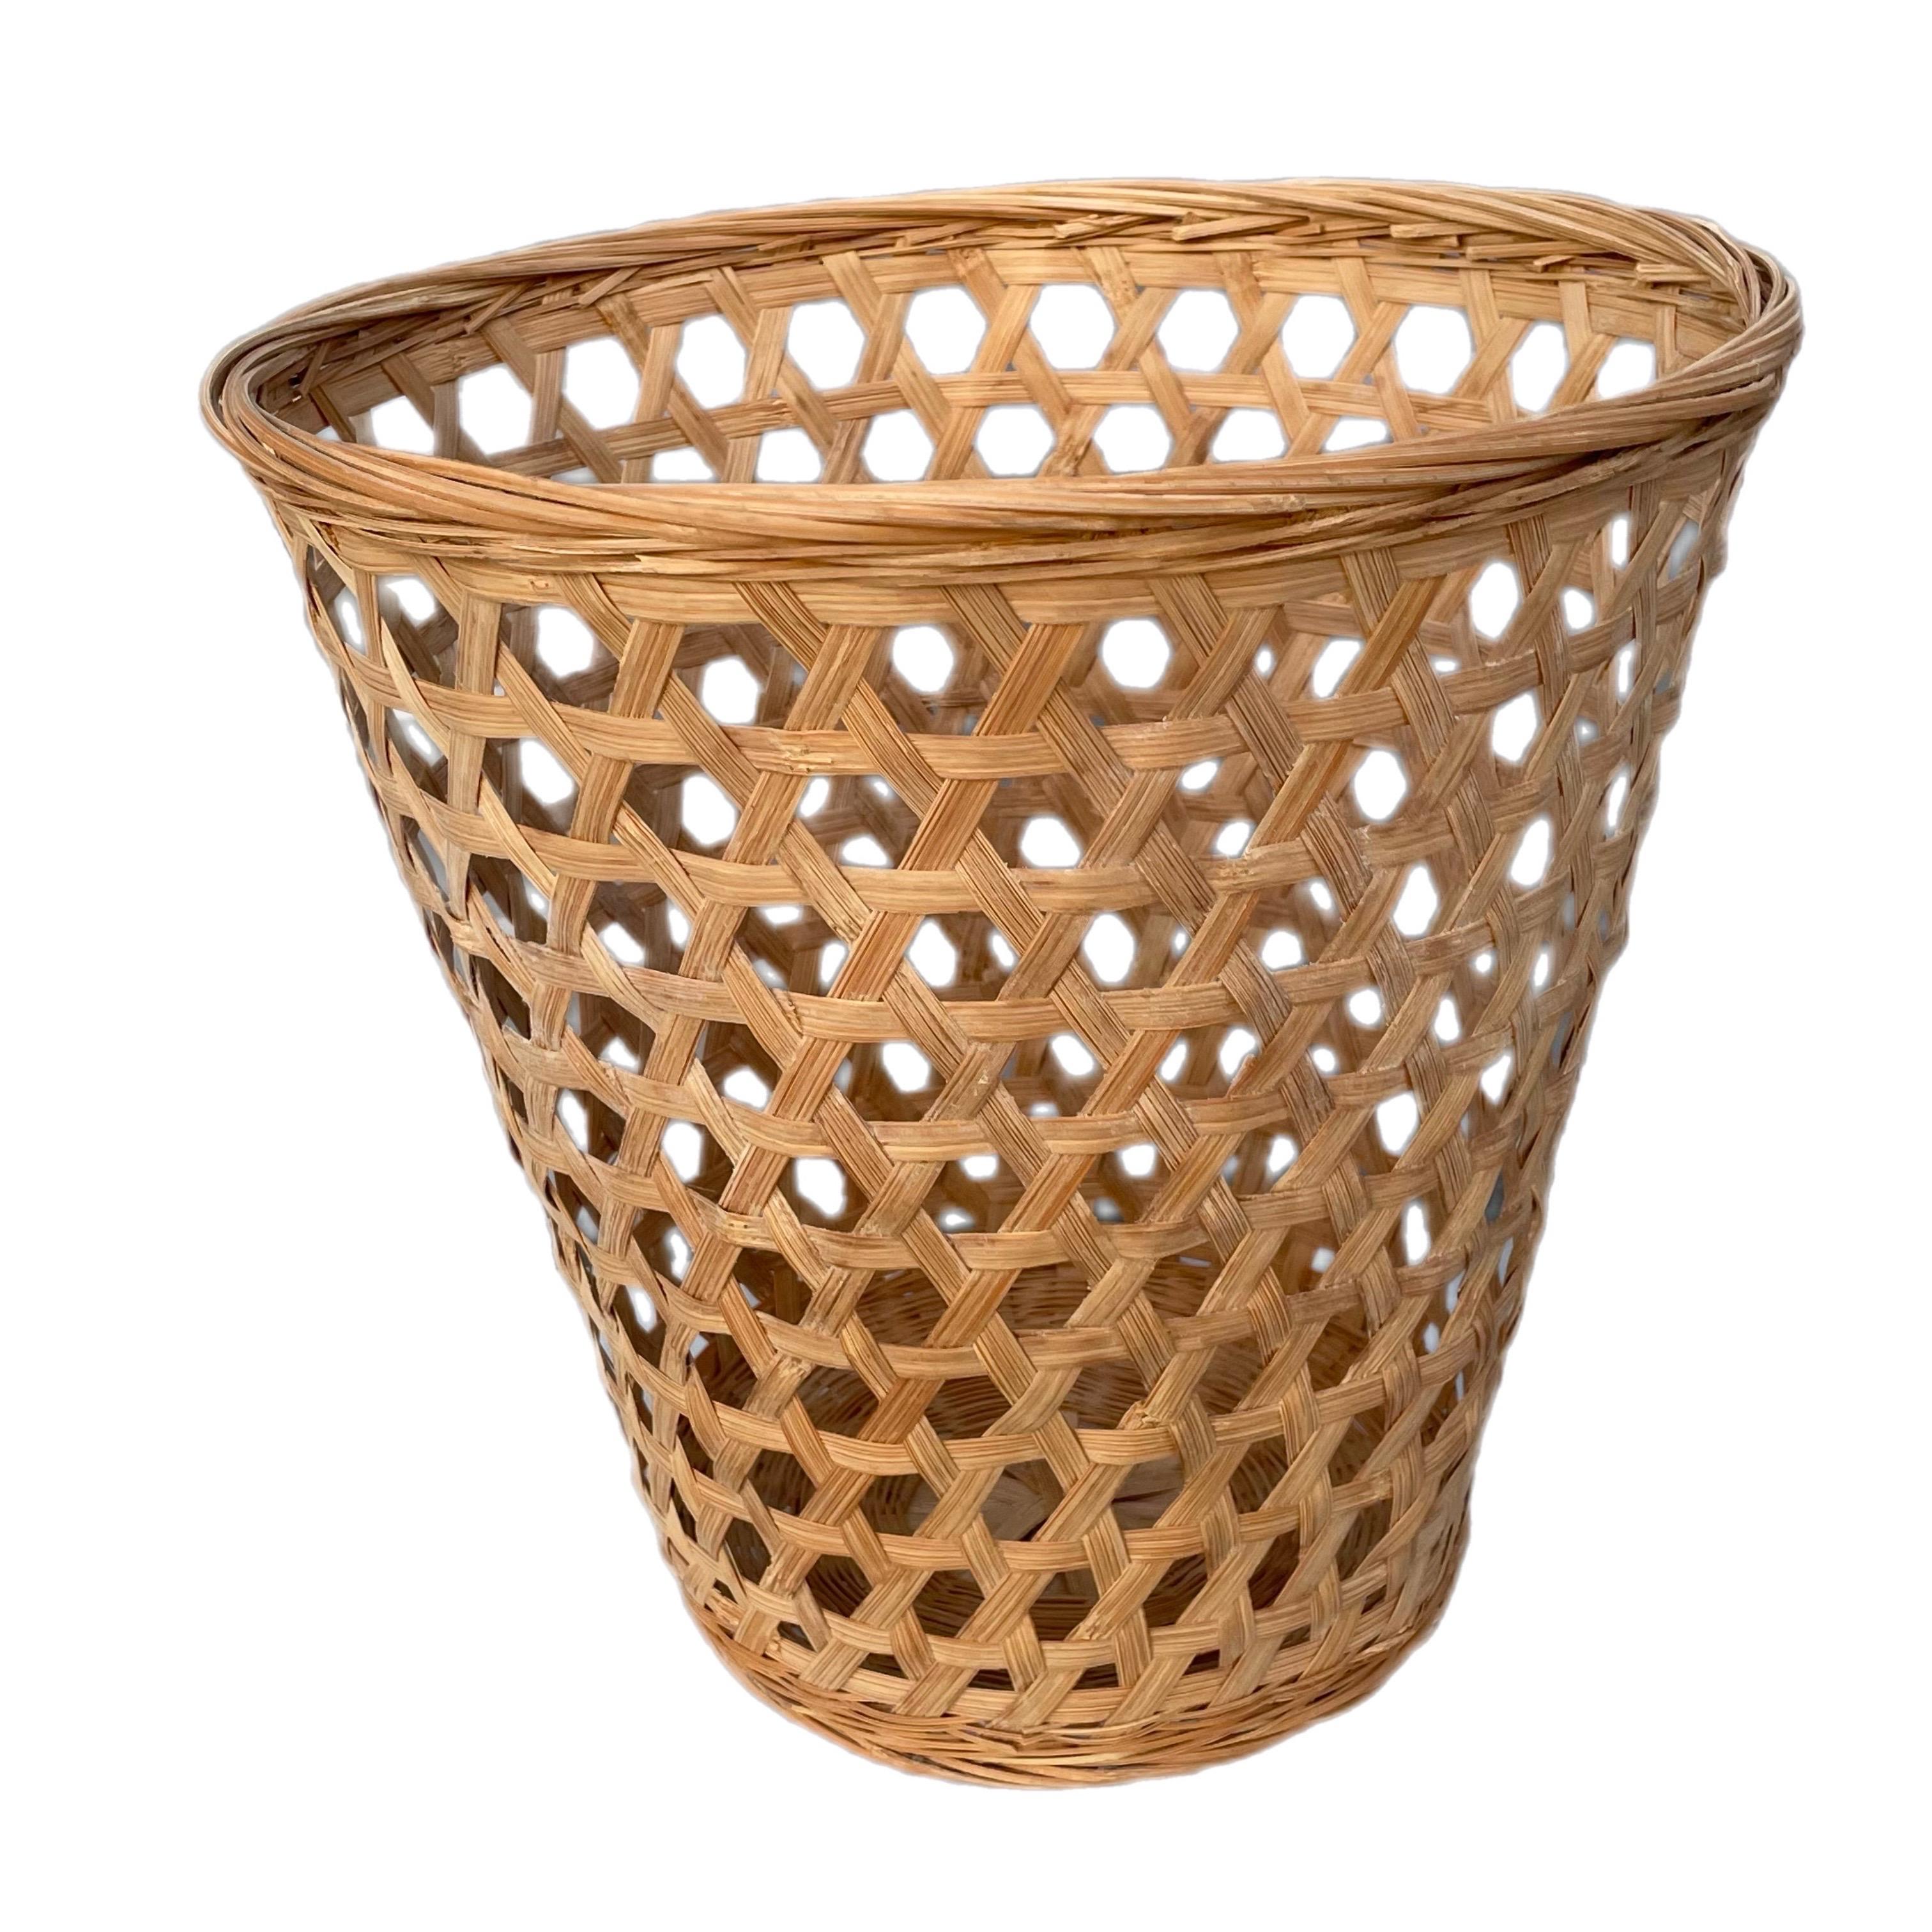 A lovely wastebasket with an open weave style. The base is a closed weave, so to keep the contents inside secure. Some wear to the basket, however overall the item is in good, functional, and aesthetically pleasing condition. I'd date the basket to